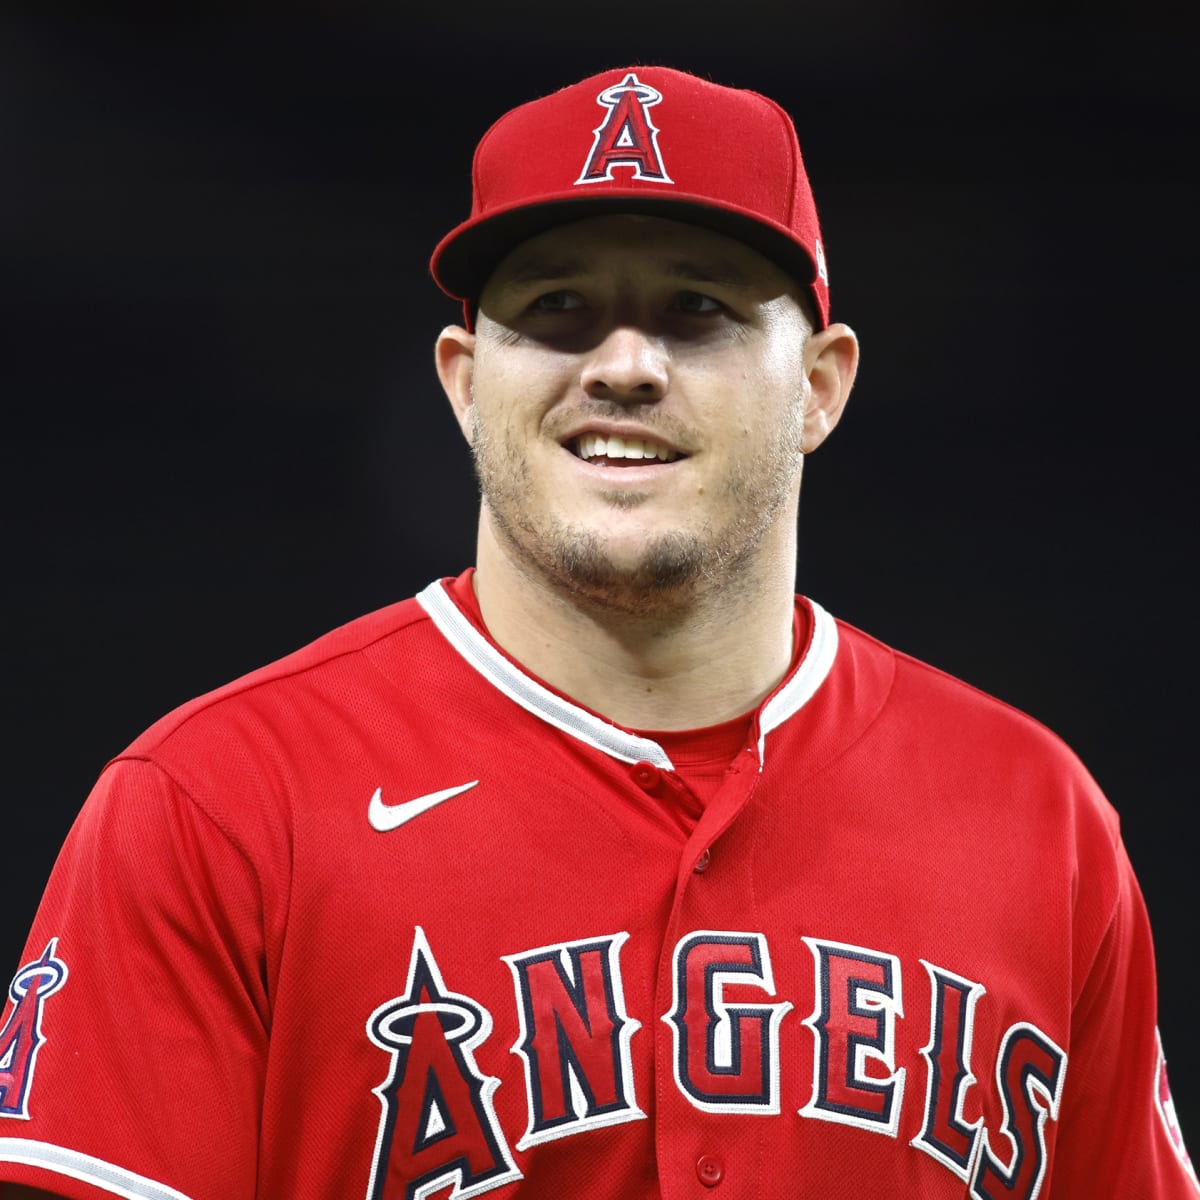 Team USA superstar outfielder Mike Trout is fully committed to play in 2026 World  Baseball Classic: I already told them I'm doing the next one